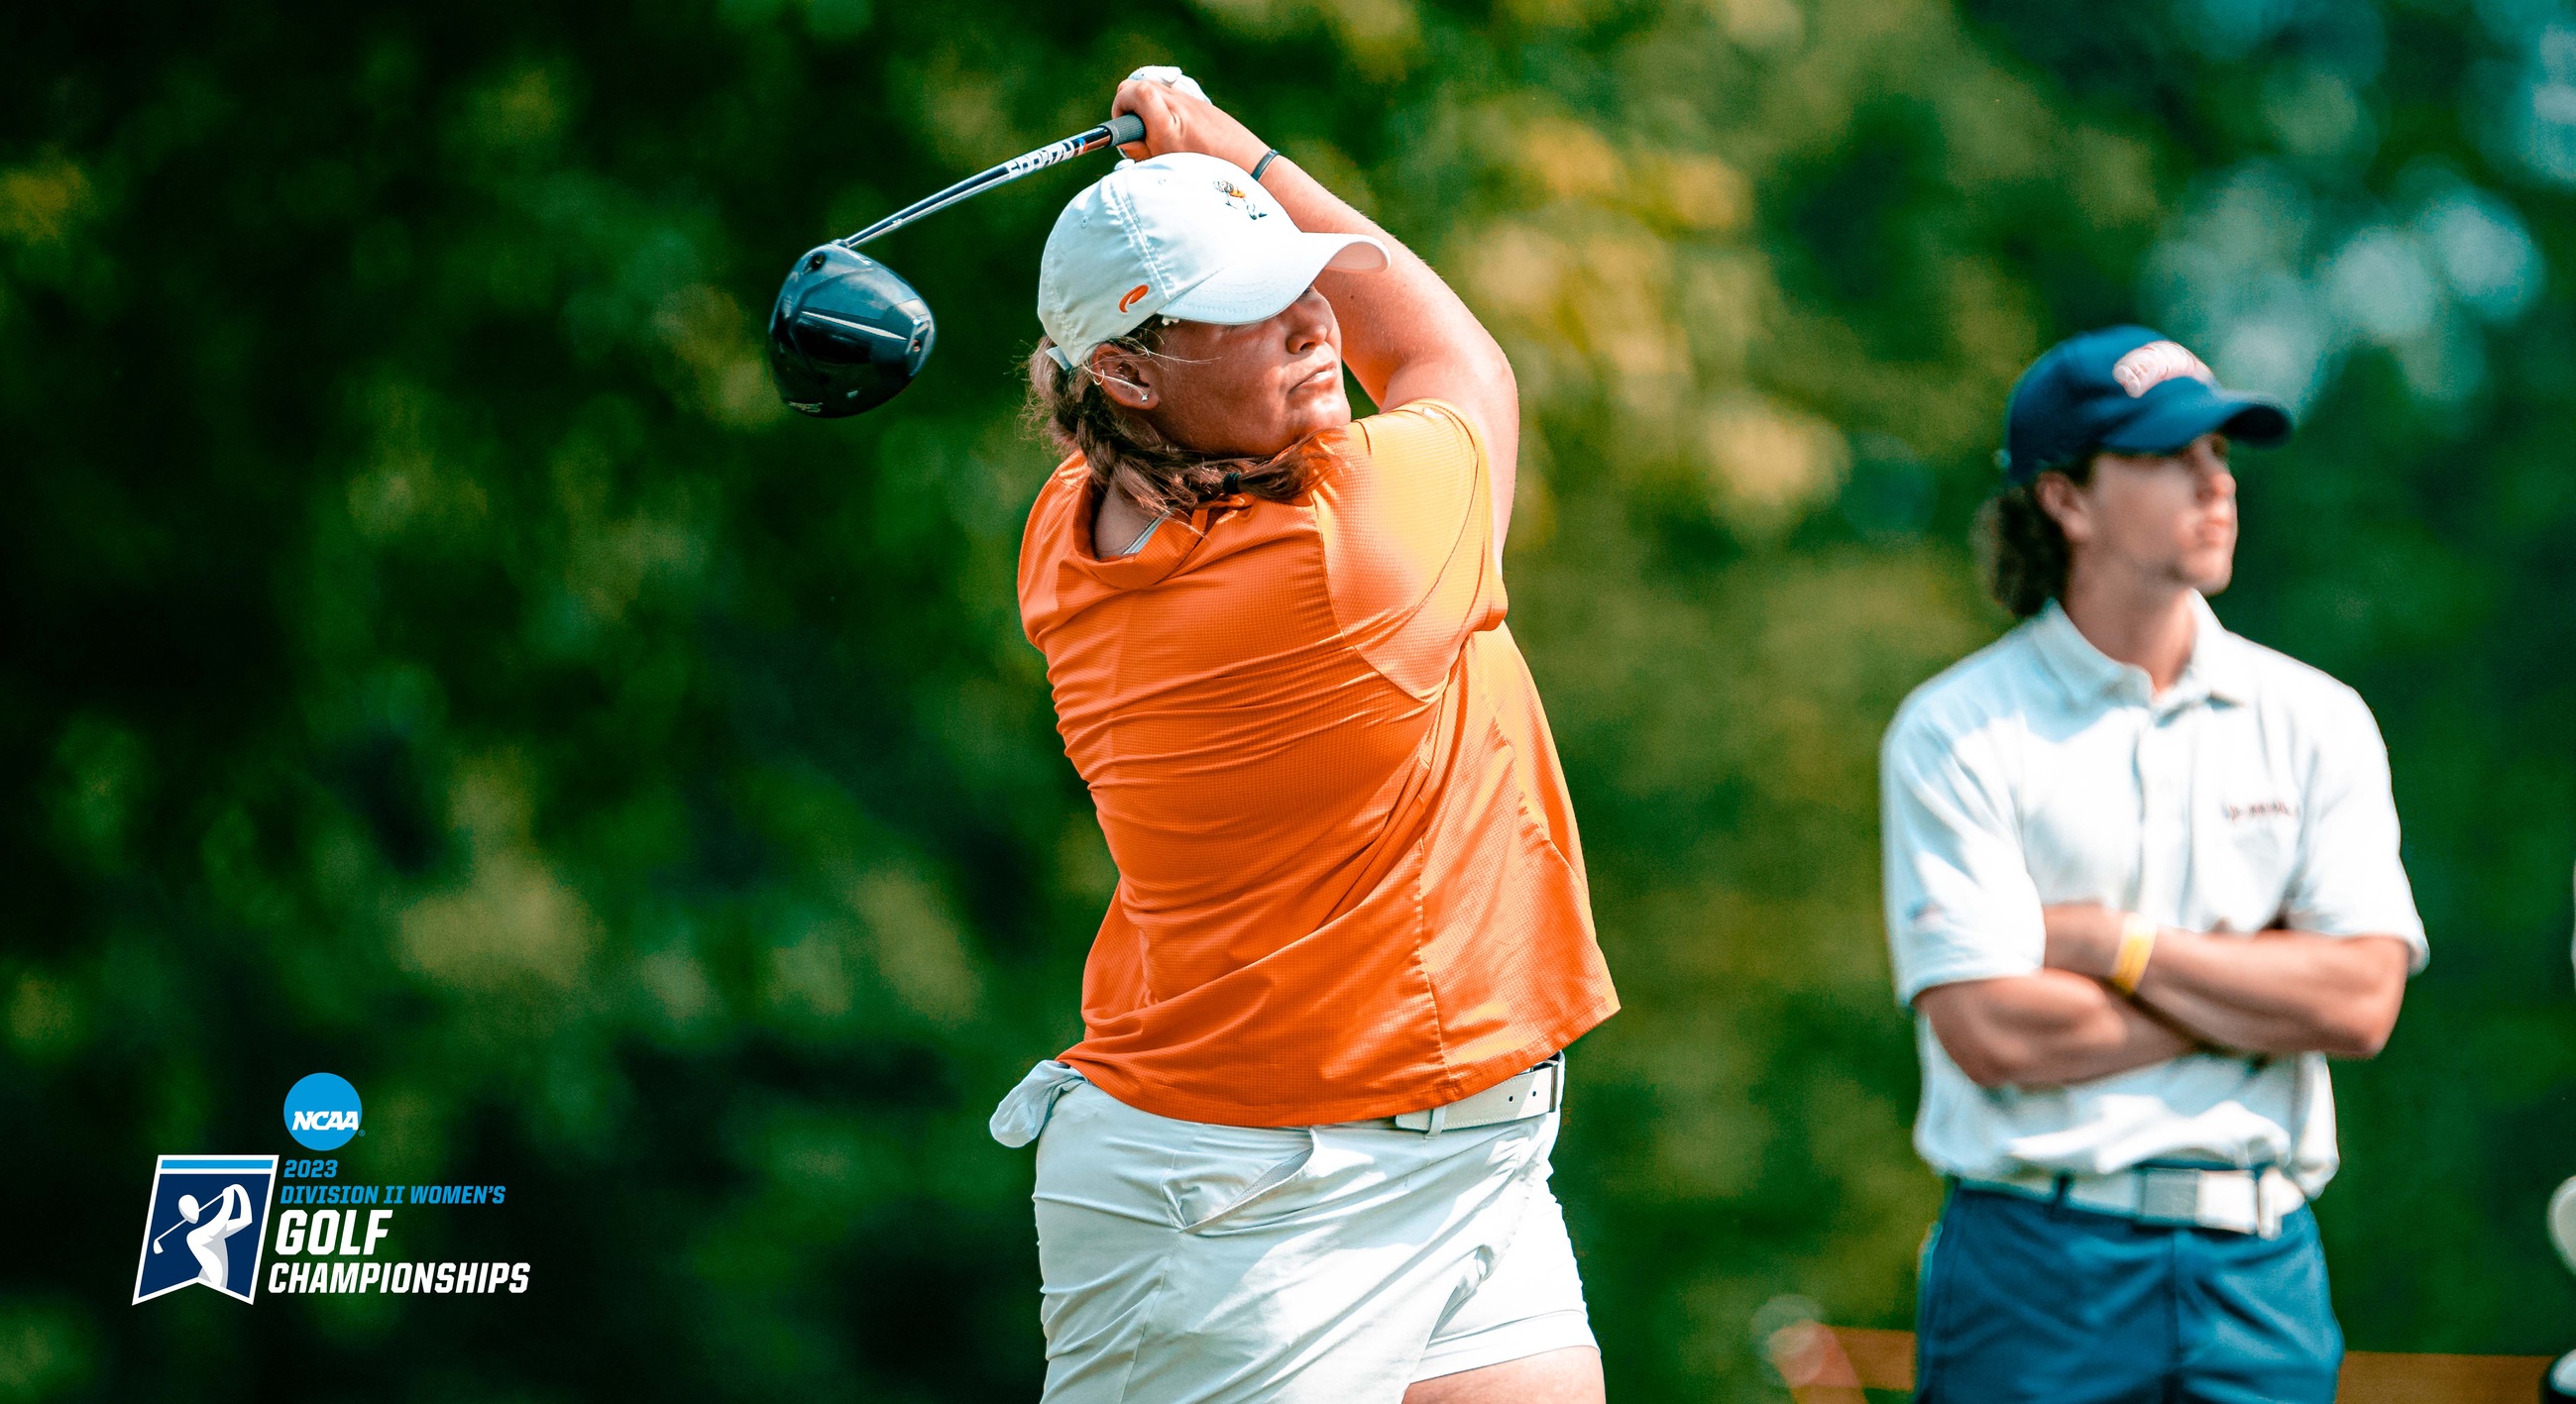 Oilers March On | Earn Trip to Medal Match Play